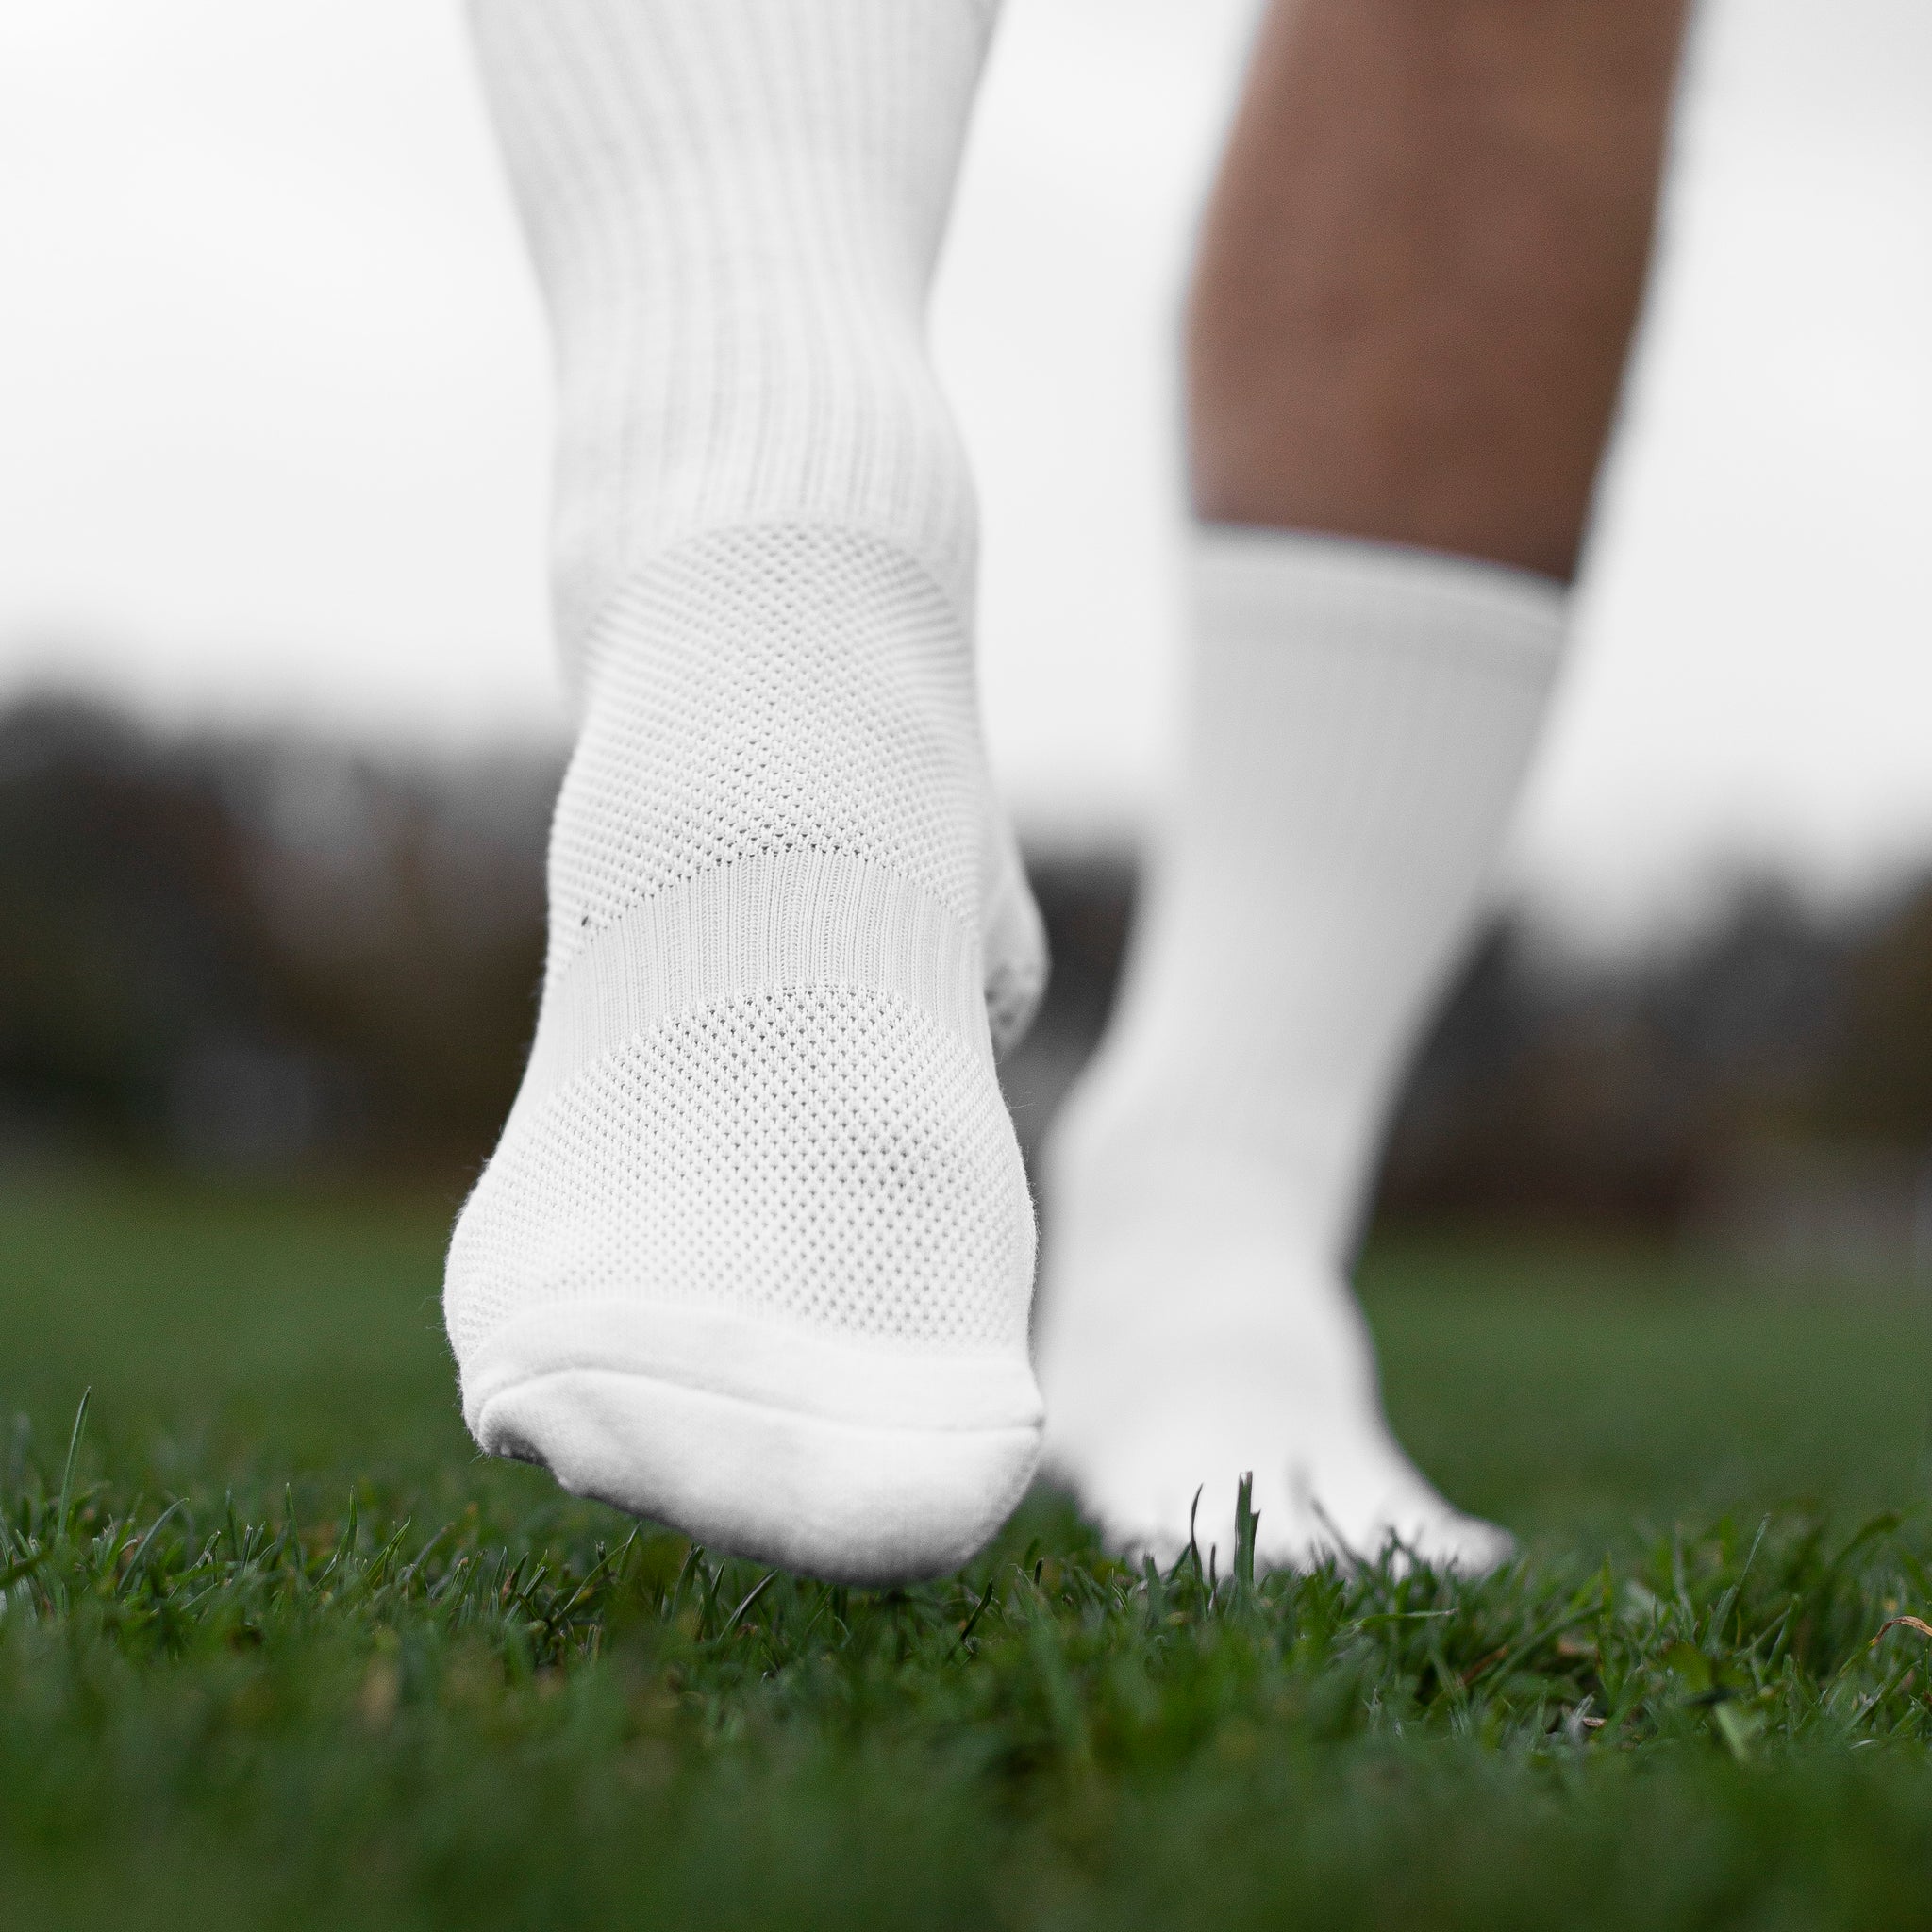 White Non Slip/Grip Socks☑️ Football, Running, Cycling! Fast Delivery ☑️ 